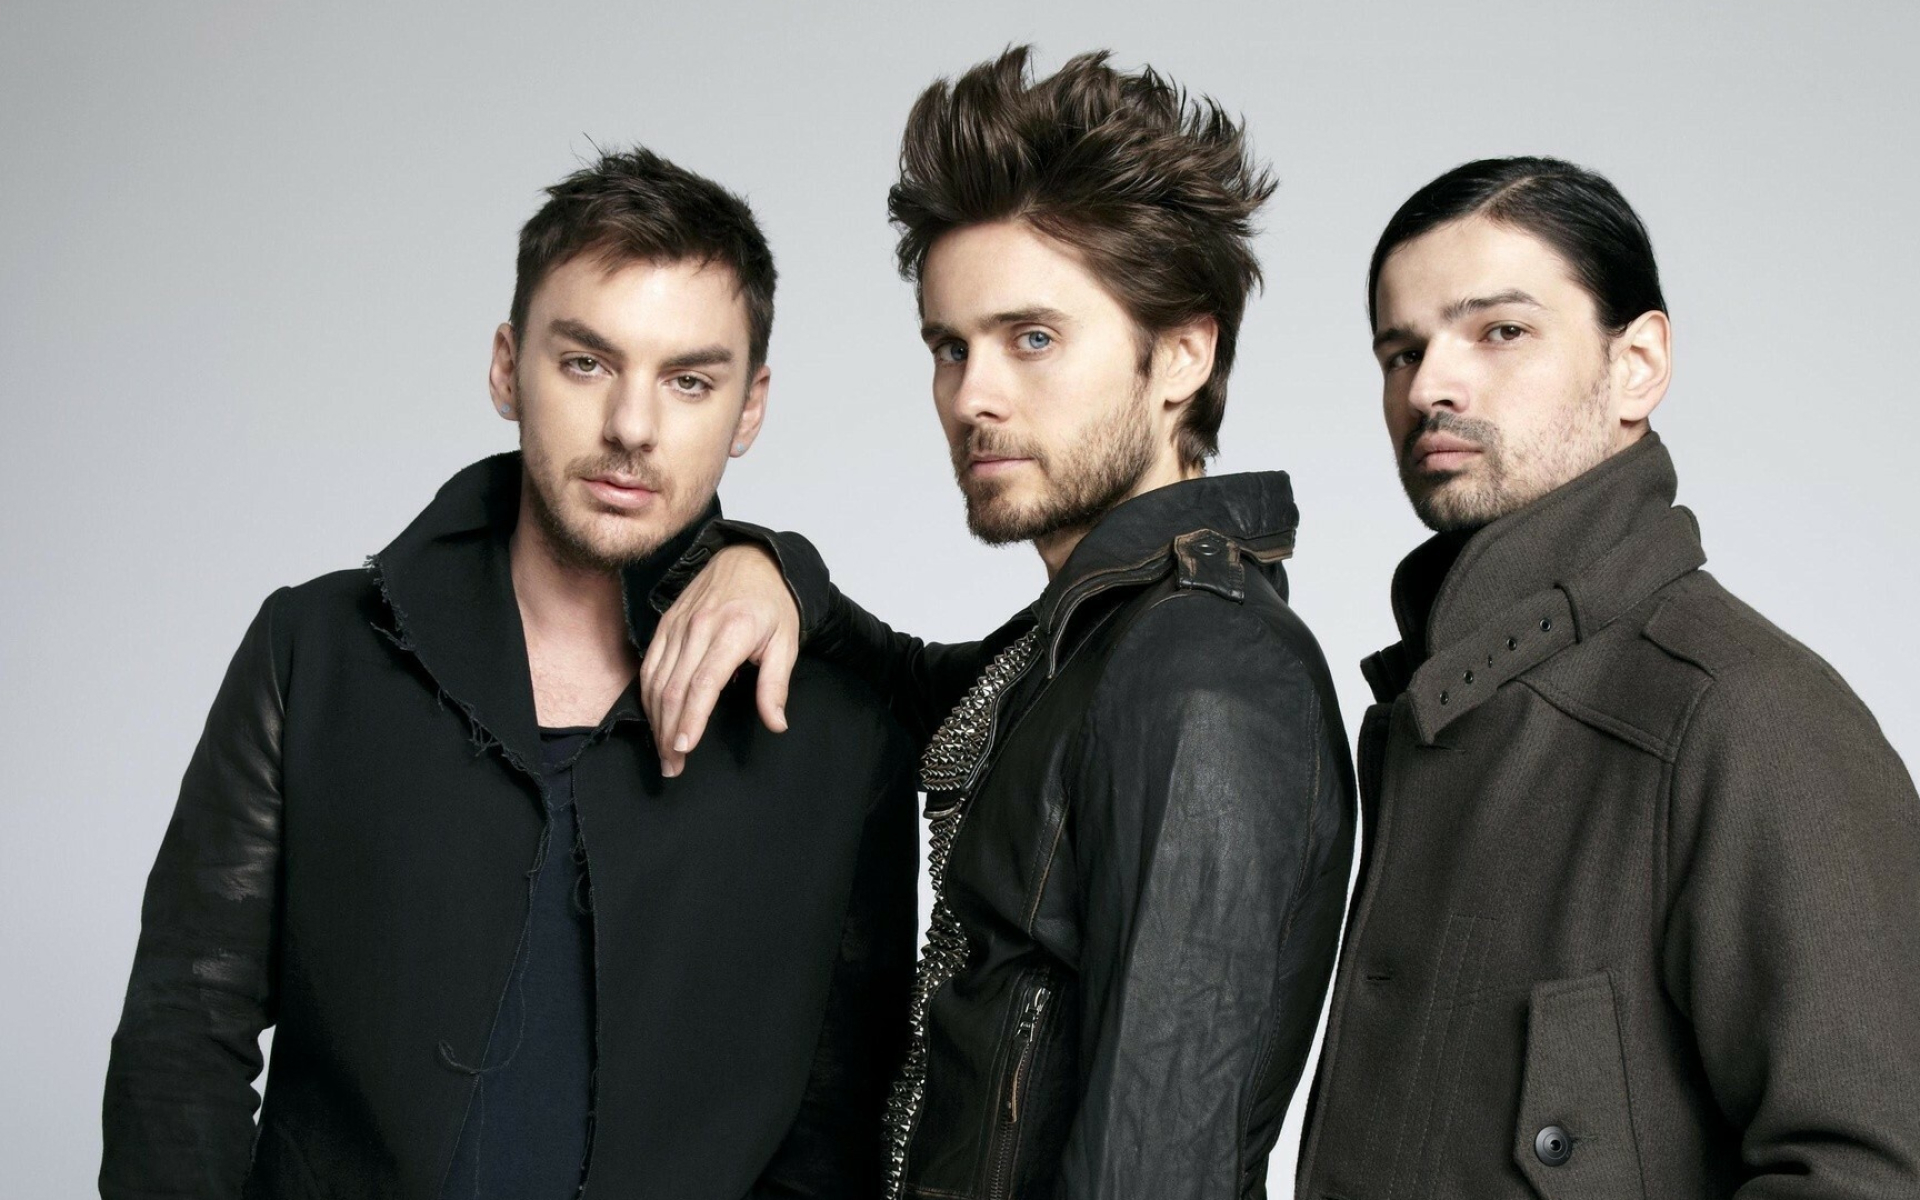 Thirty Seconds to Mars: "Search and Destroy" was released as a promotional single to UK radio on October 25, 2010. 1920x1200 HD Wallpaper.